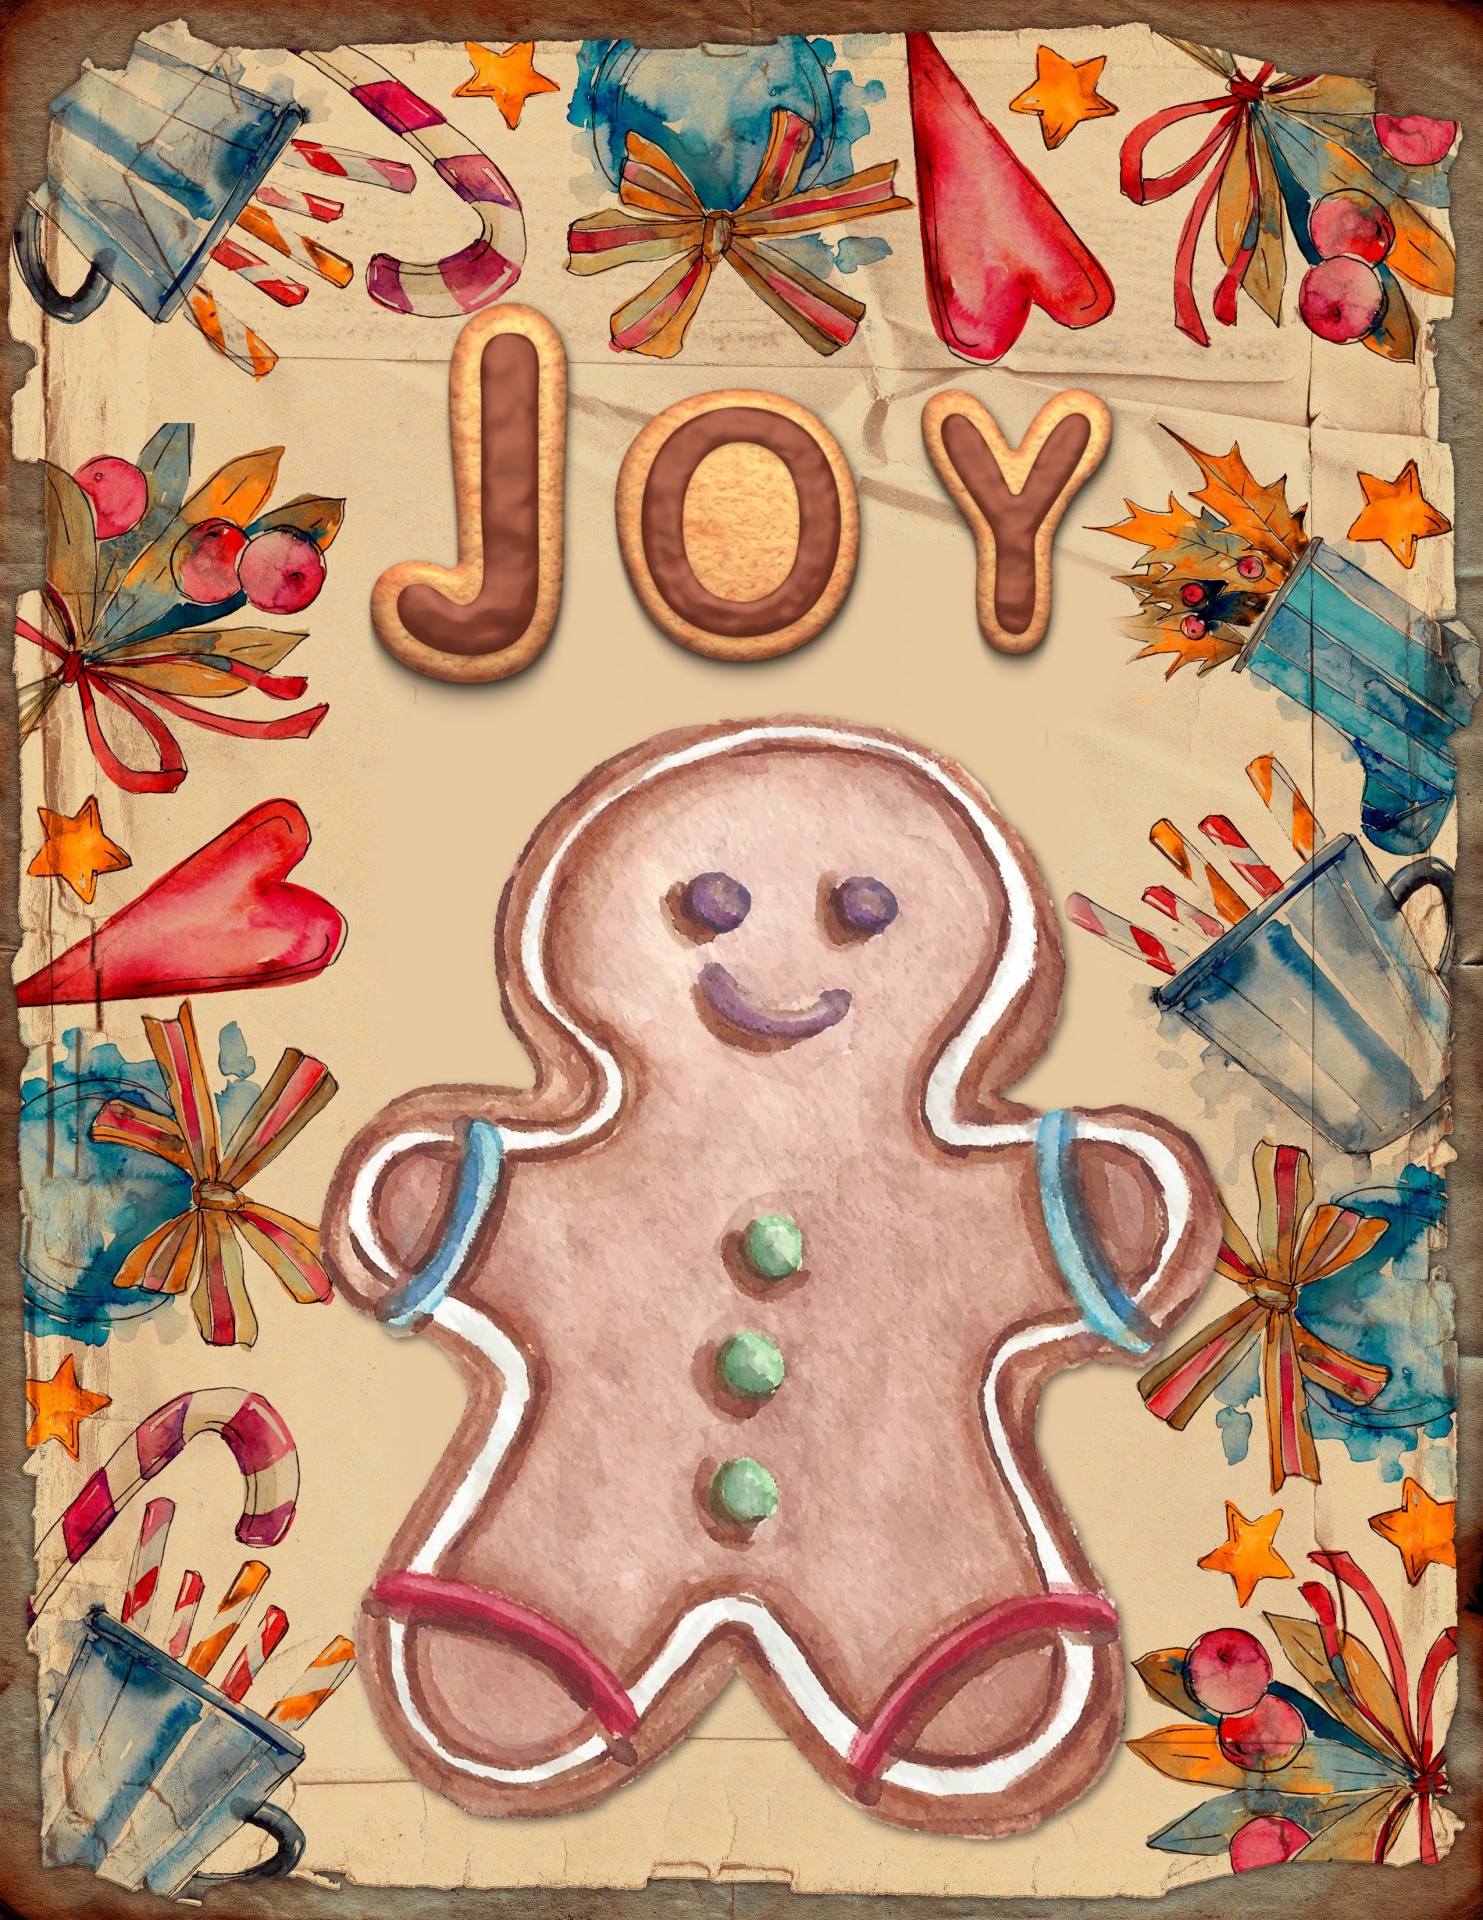 gingerbread-man-cookie-free-stock-photo-public-domain-pictures